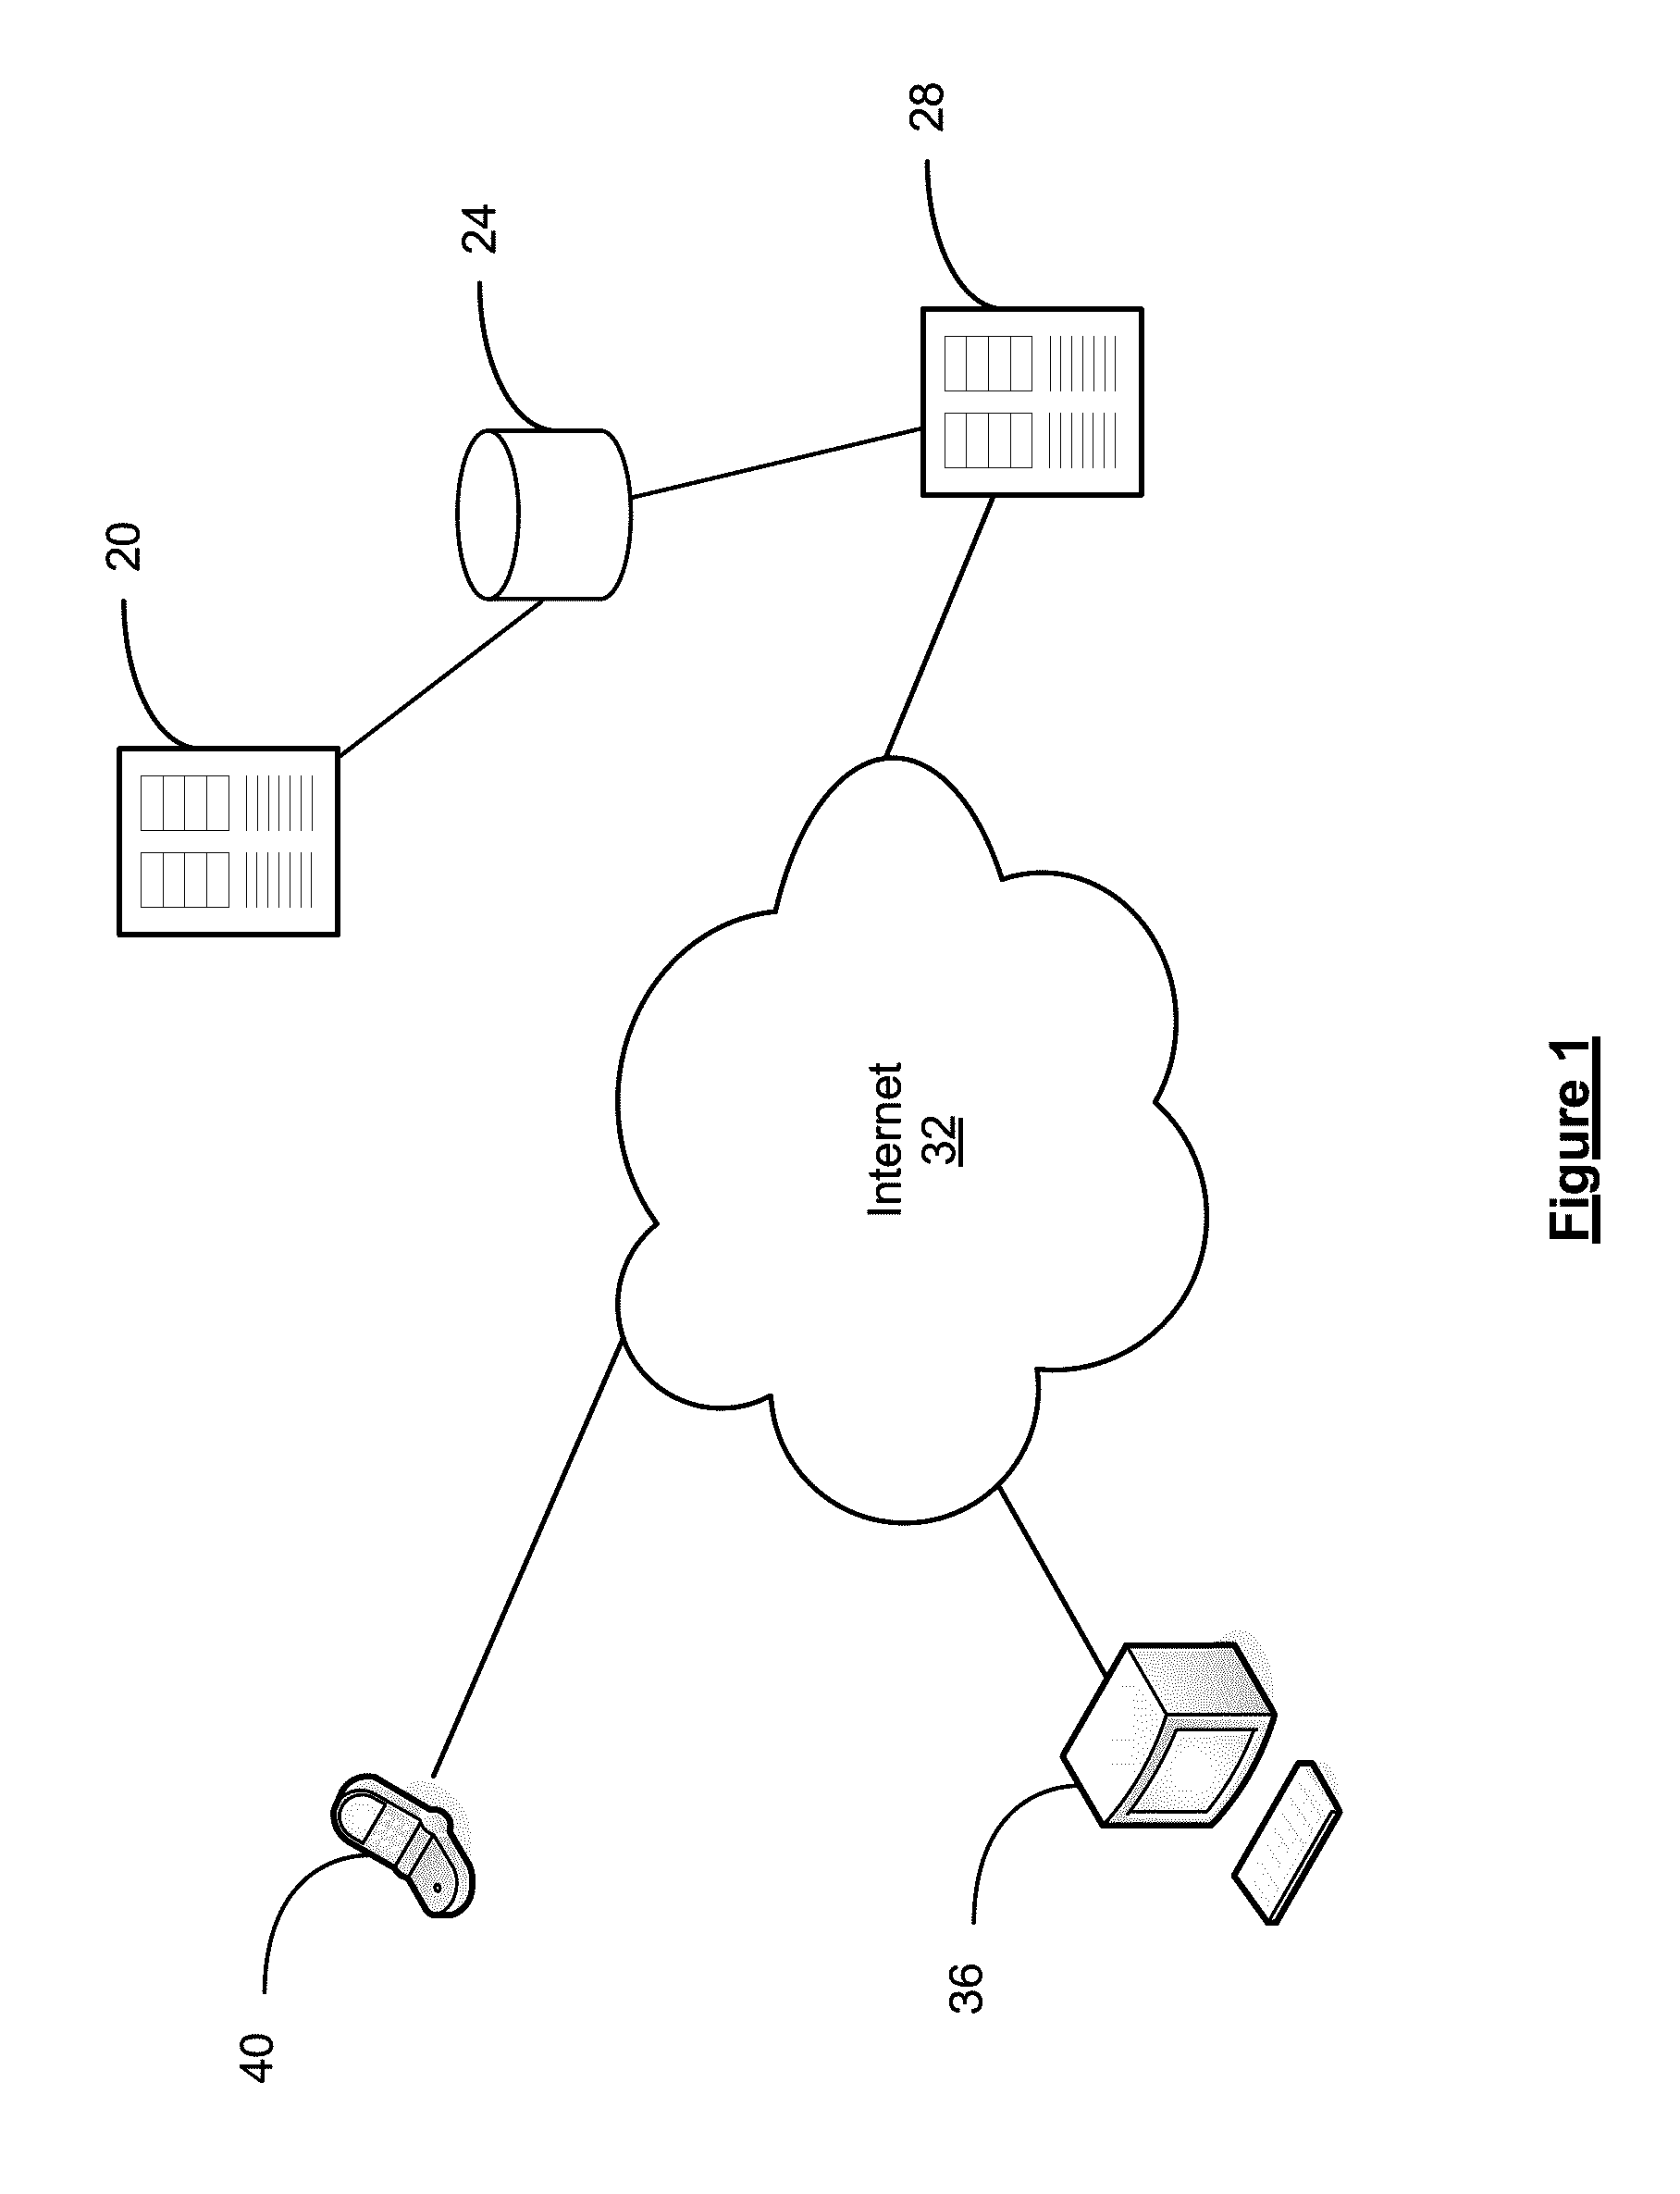 Method and system for generating viable pattern-transfers for an itinerary -planning system